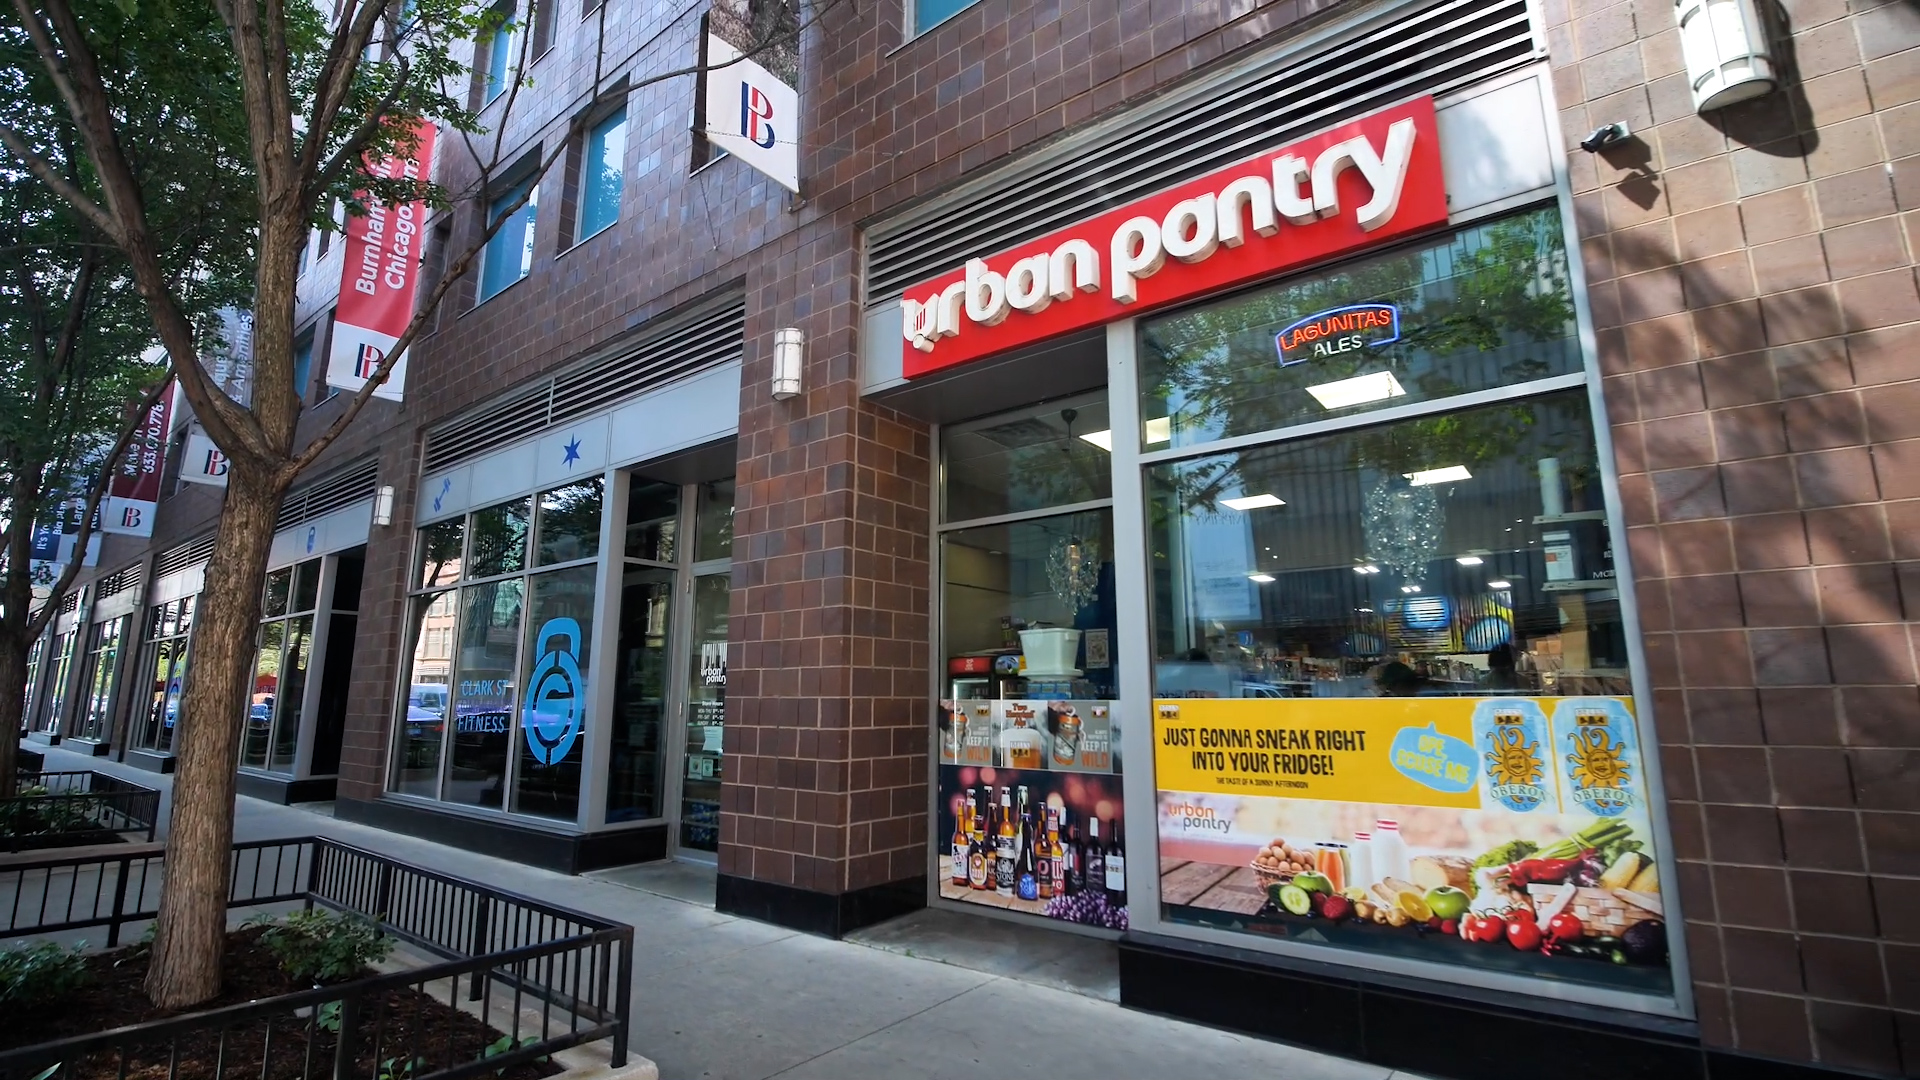 Standing on the sidewalk looking angled at the storefront to Urban Pantry at Burnham Pointe. There are ads in the windows and the shop is seen inside.